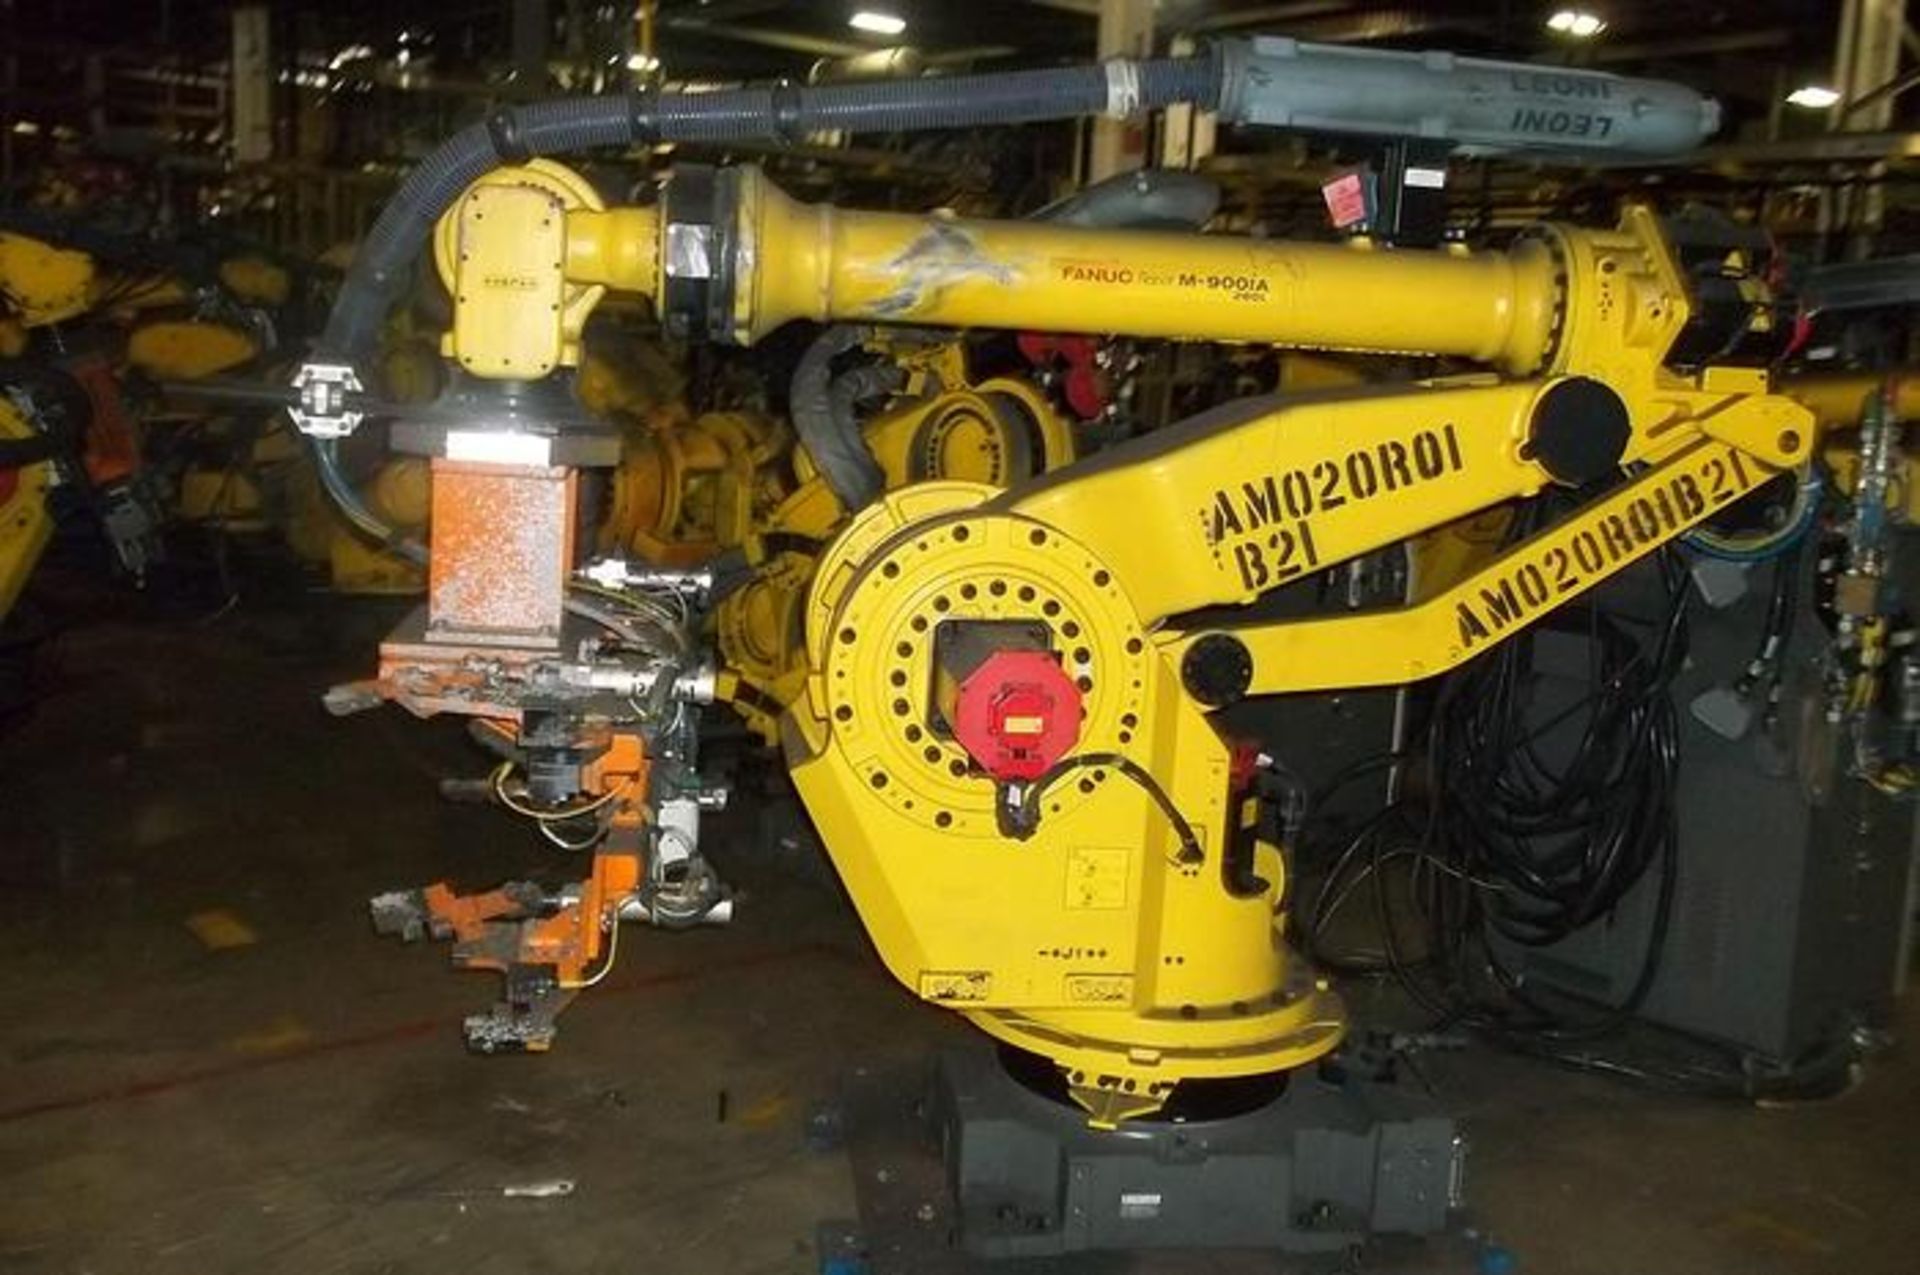 FANUC ROBOT M900iA/260L ROBOTS WITH R30IA CONTROLLERS